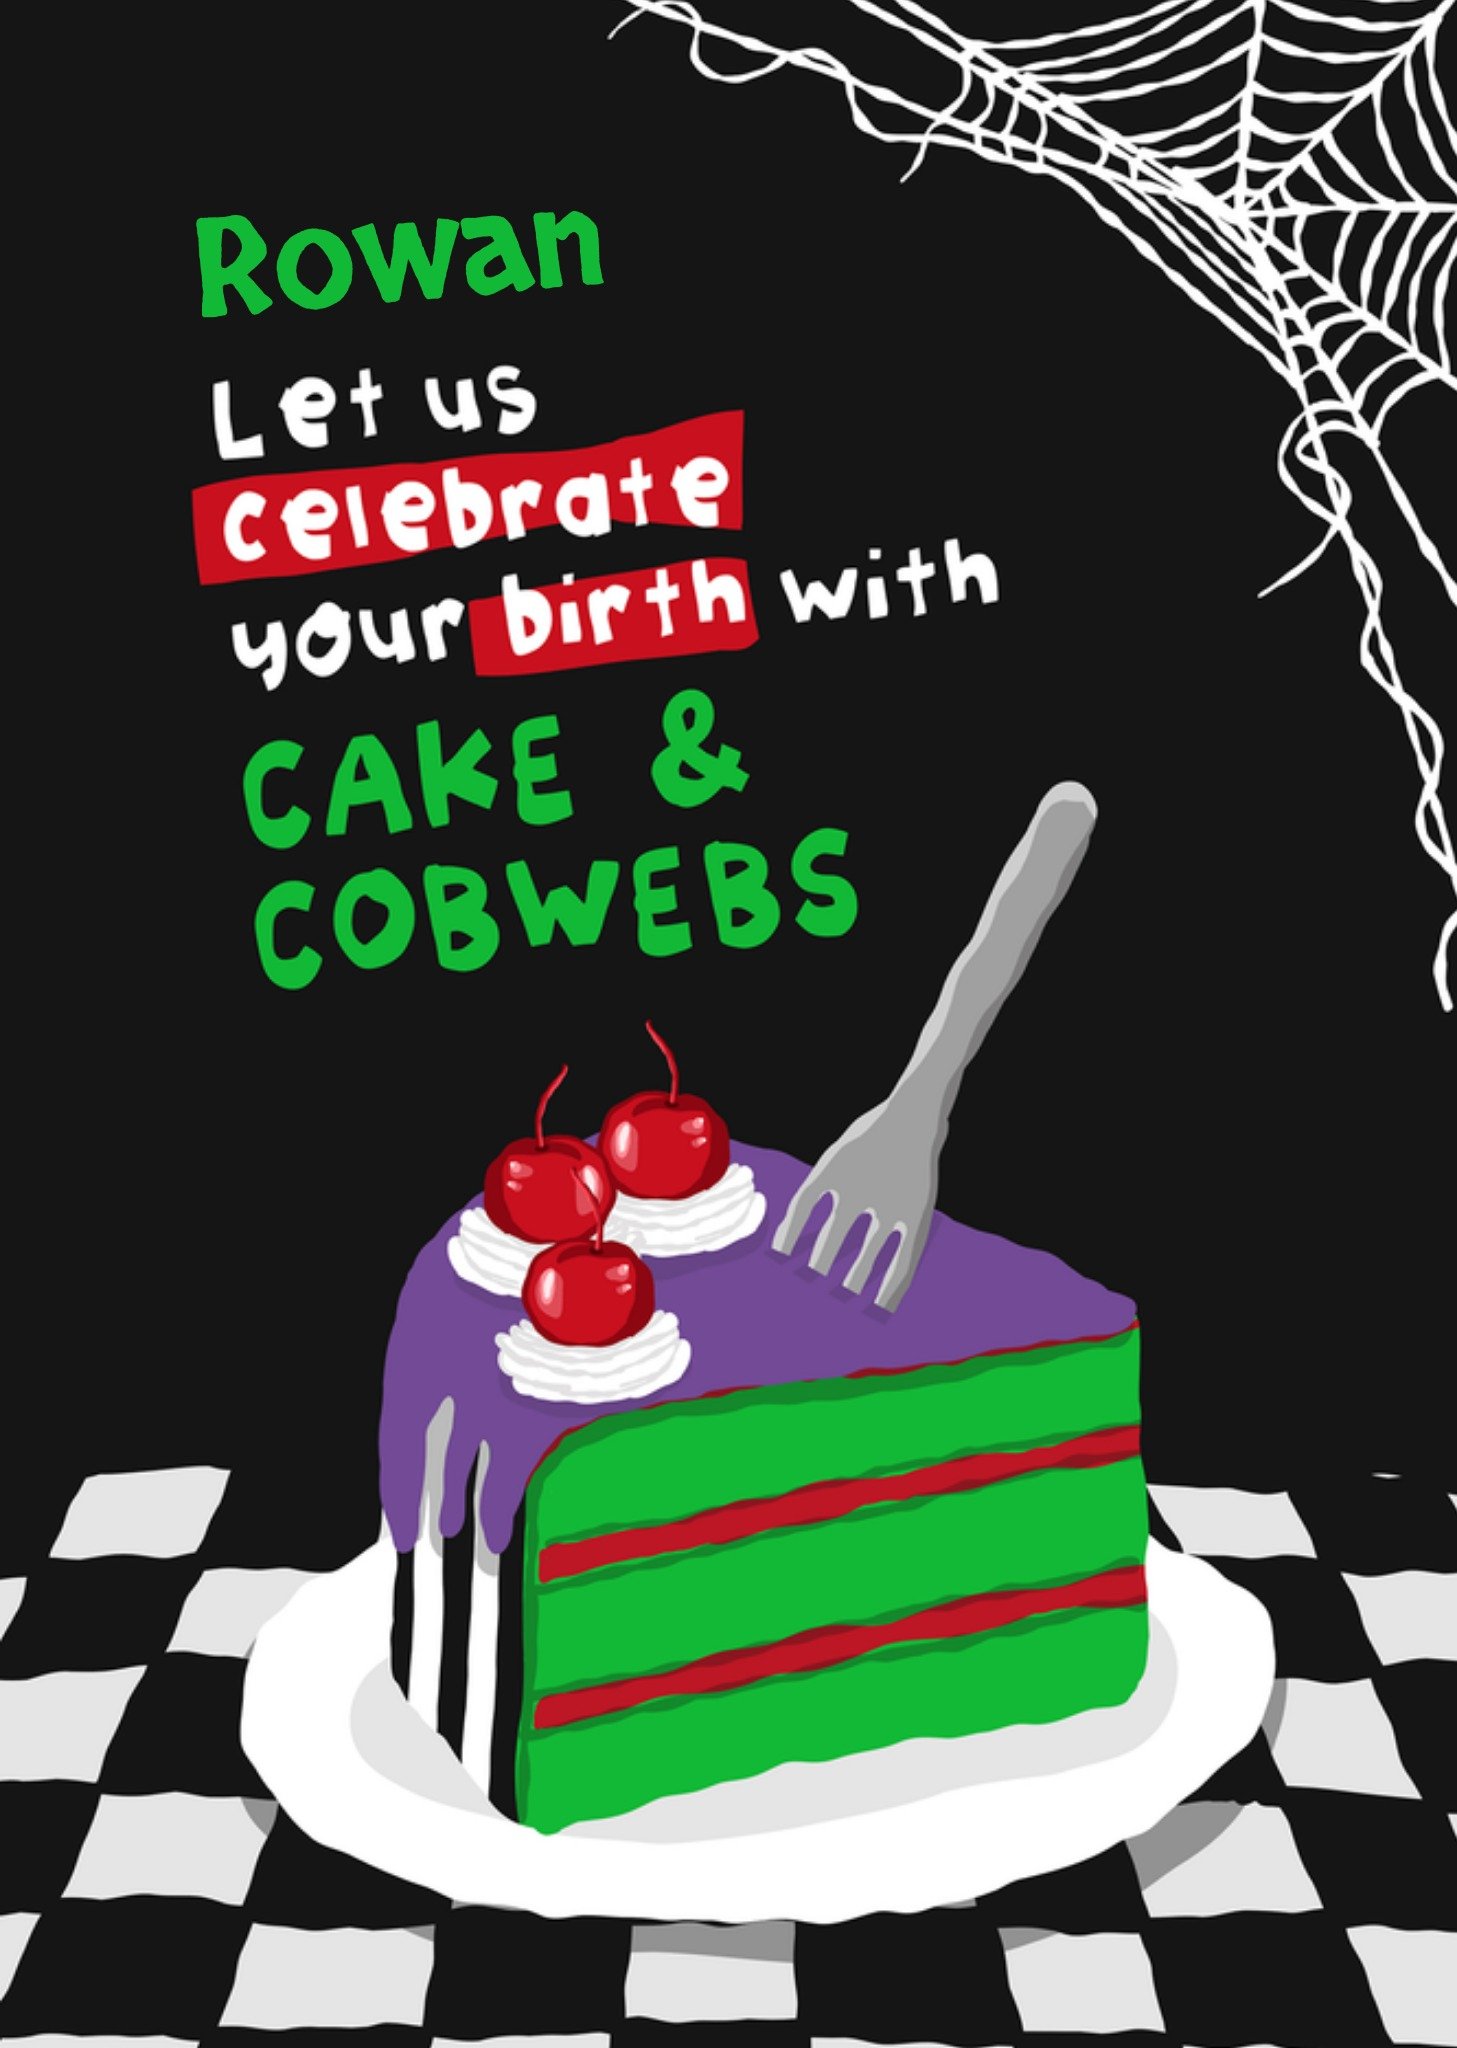 Moonpig Let Us Celebrate Your Birth With Cake & Cobwebs Card Ecard